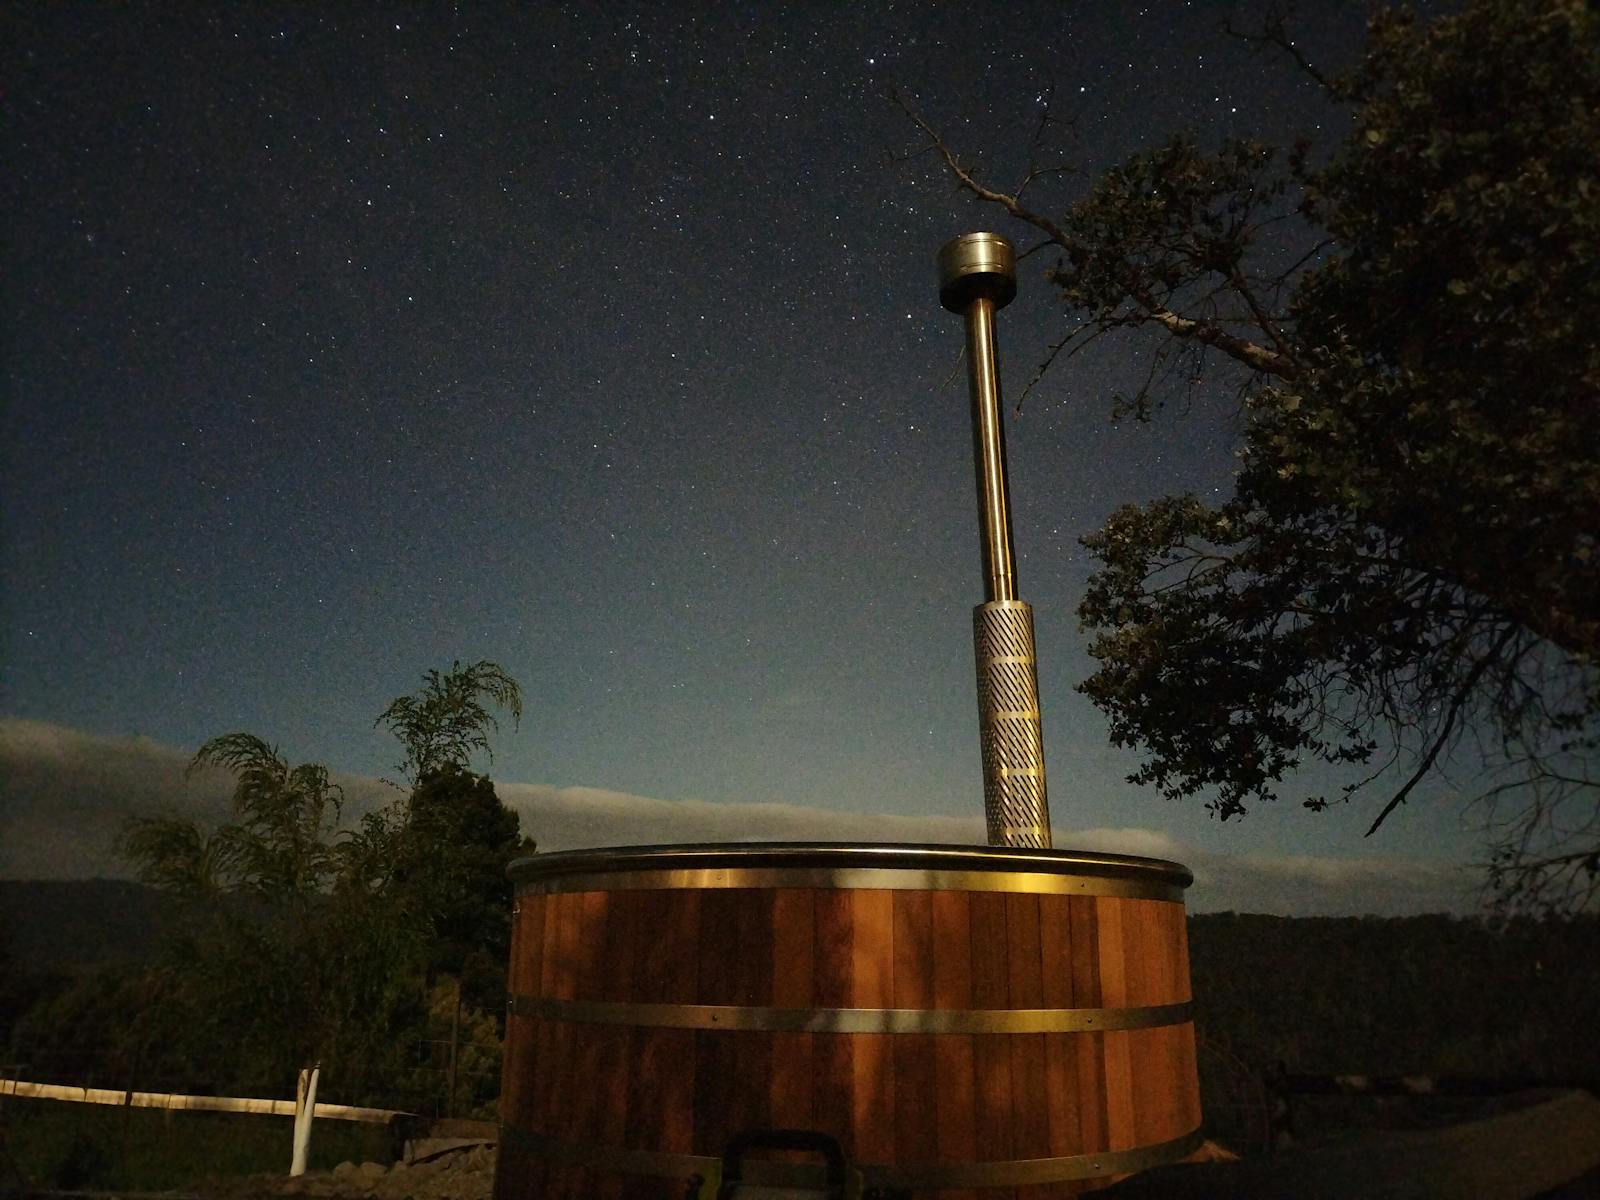 Nighttime view of wood-fired hot tub with stars